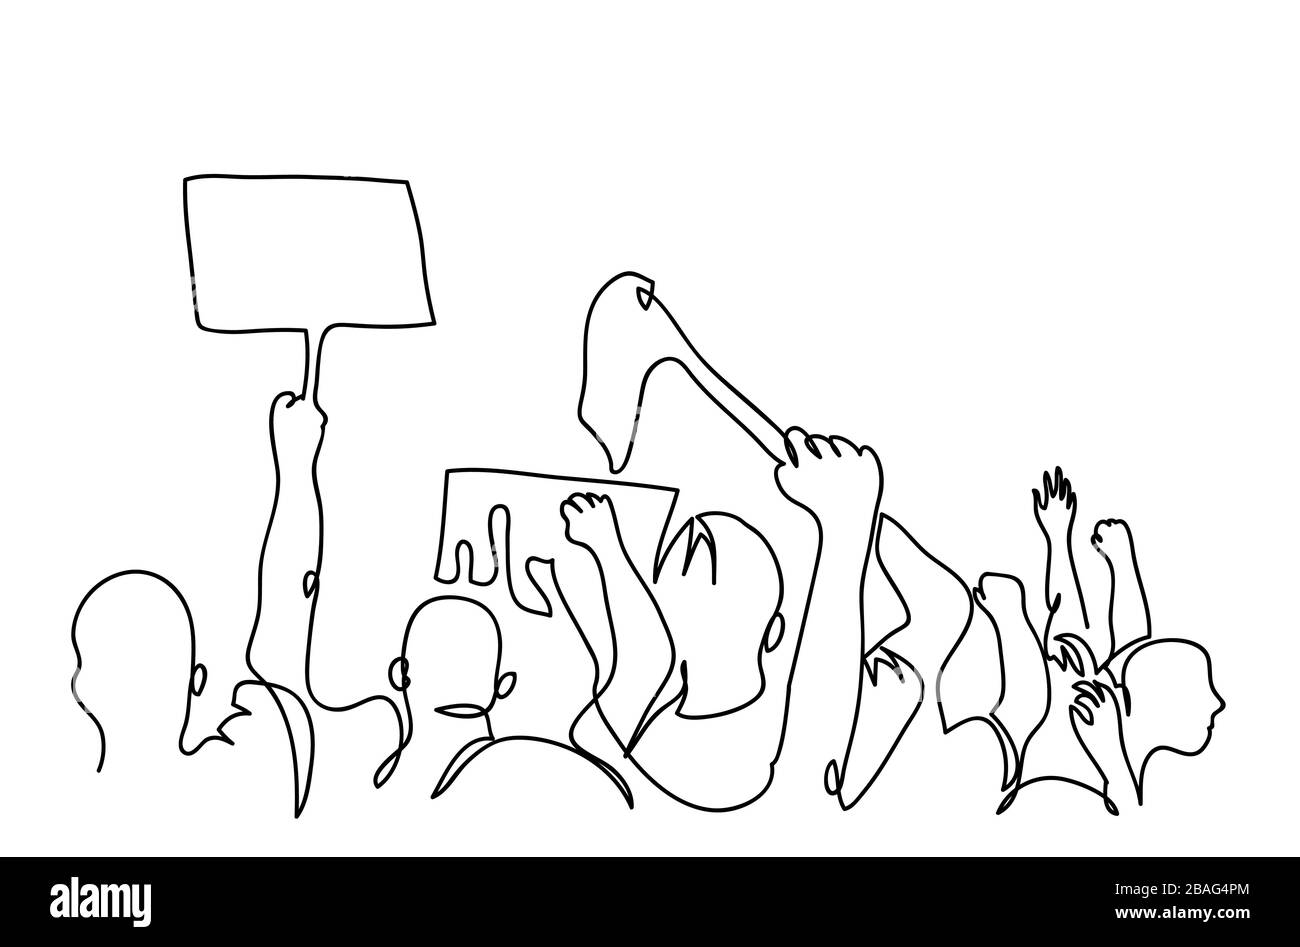 Protesters crowd one line drawing Stock Vector